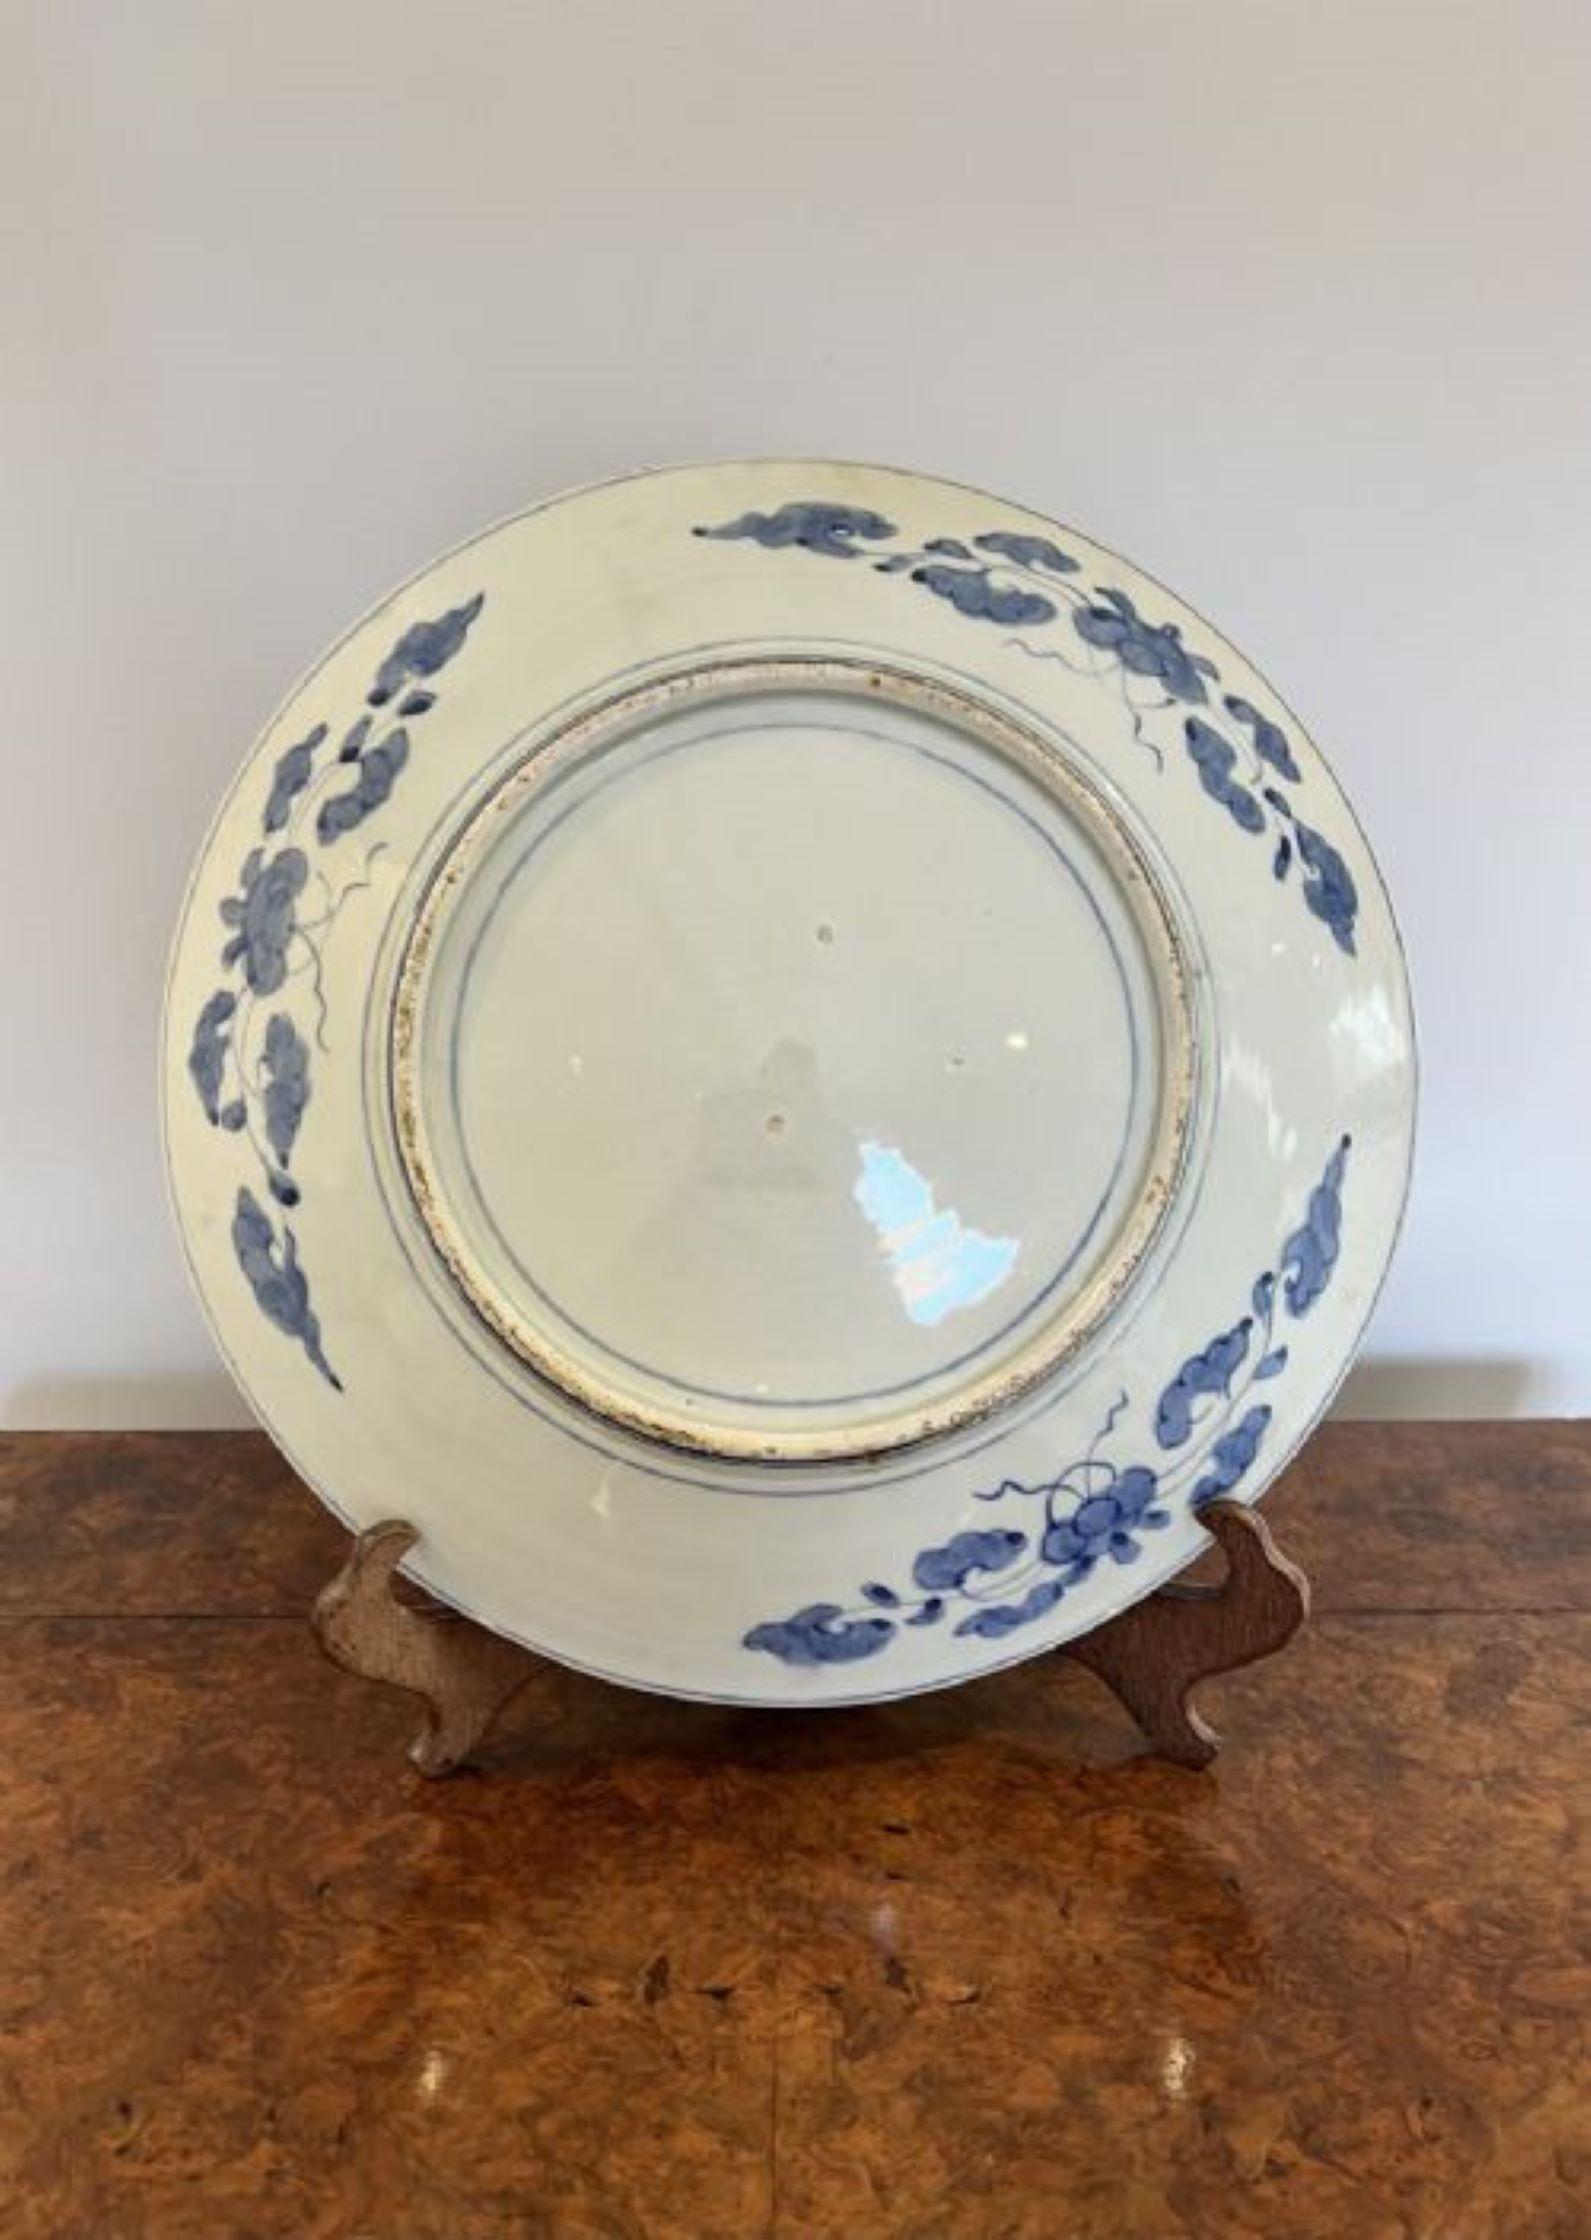 Fantastic quality large antique Japanese Imari plate having a fantastic quality Imari charger, fabulous hand painted centre decorated with orange, blue and gold flowers with leaves surrounded by panels decorated with flowers, leaves, trees and birds